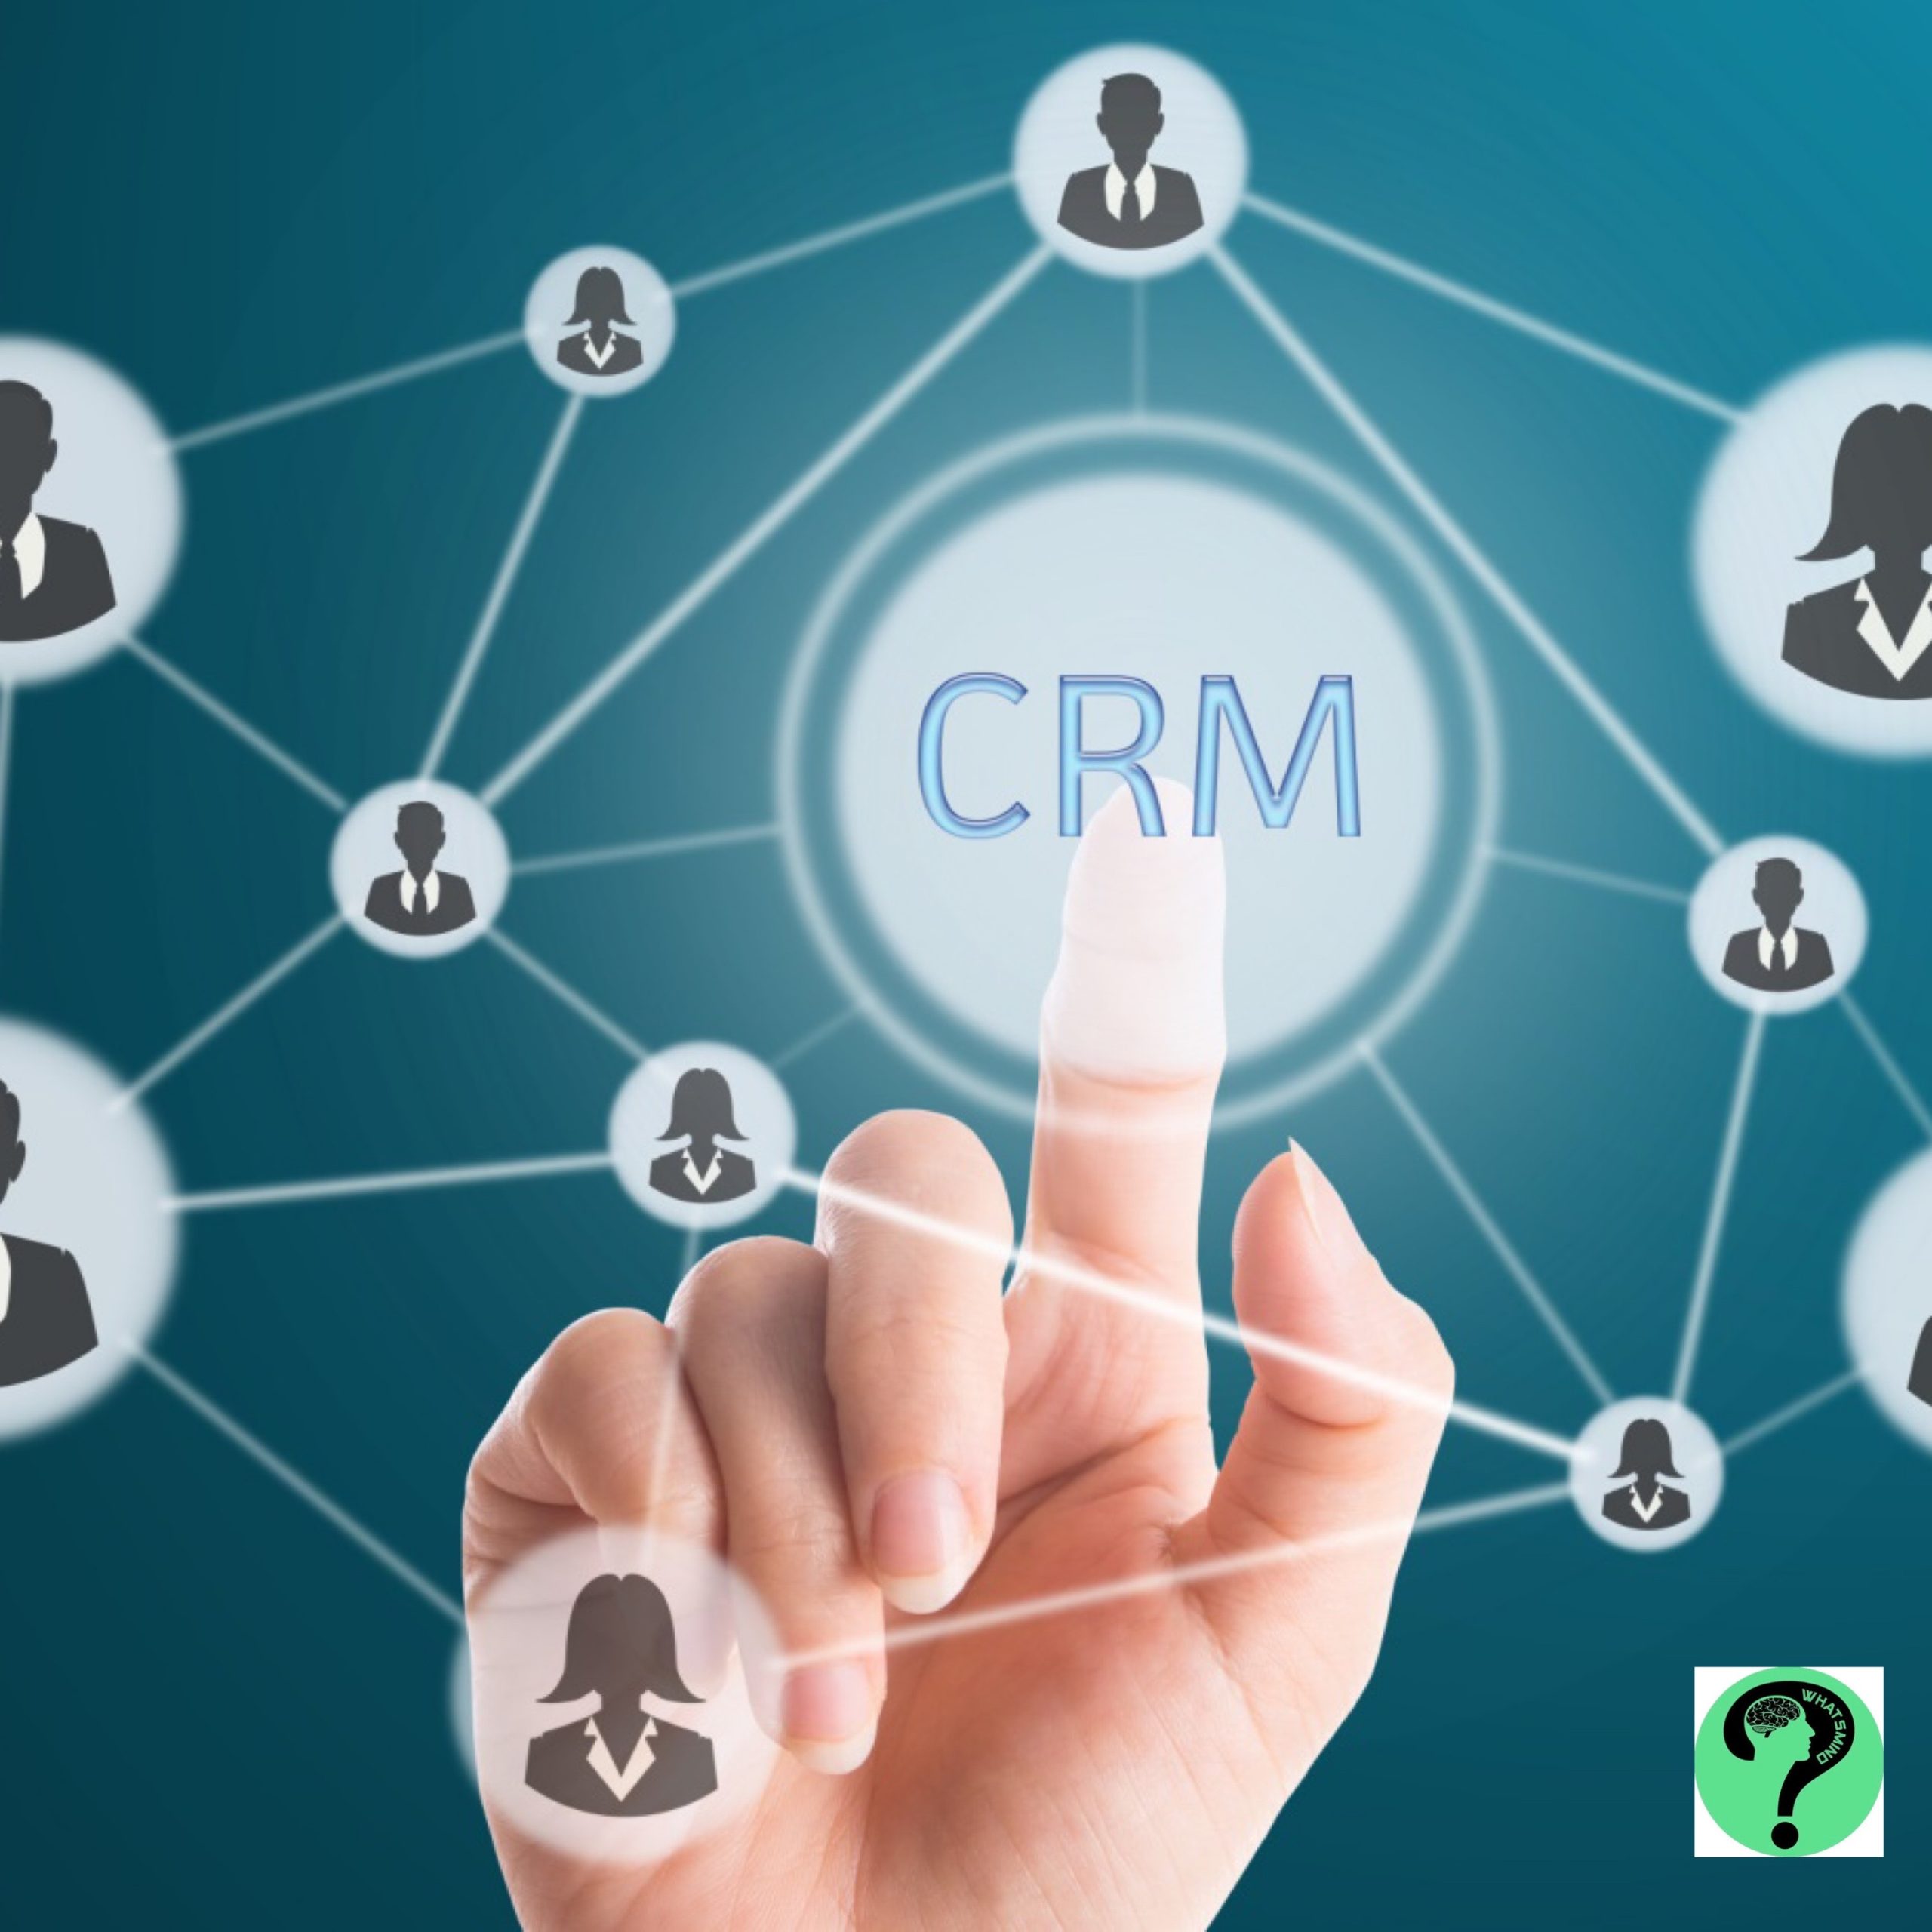 What is the Best CRM Software for Small Business?